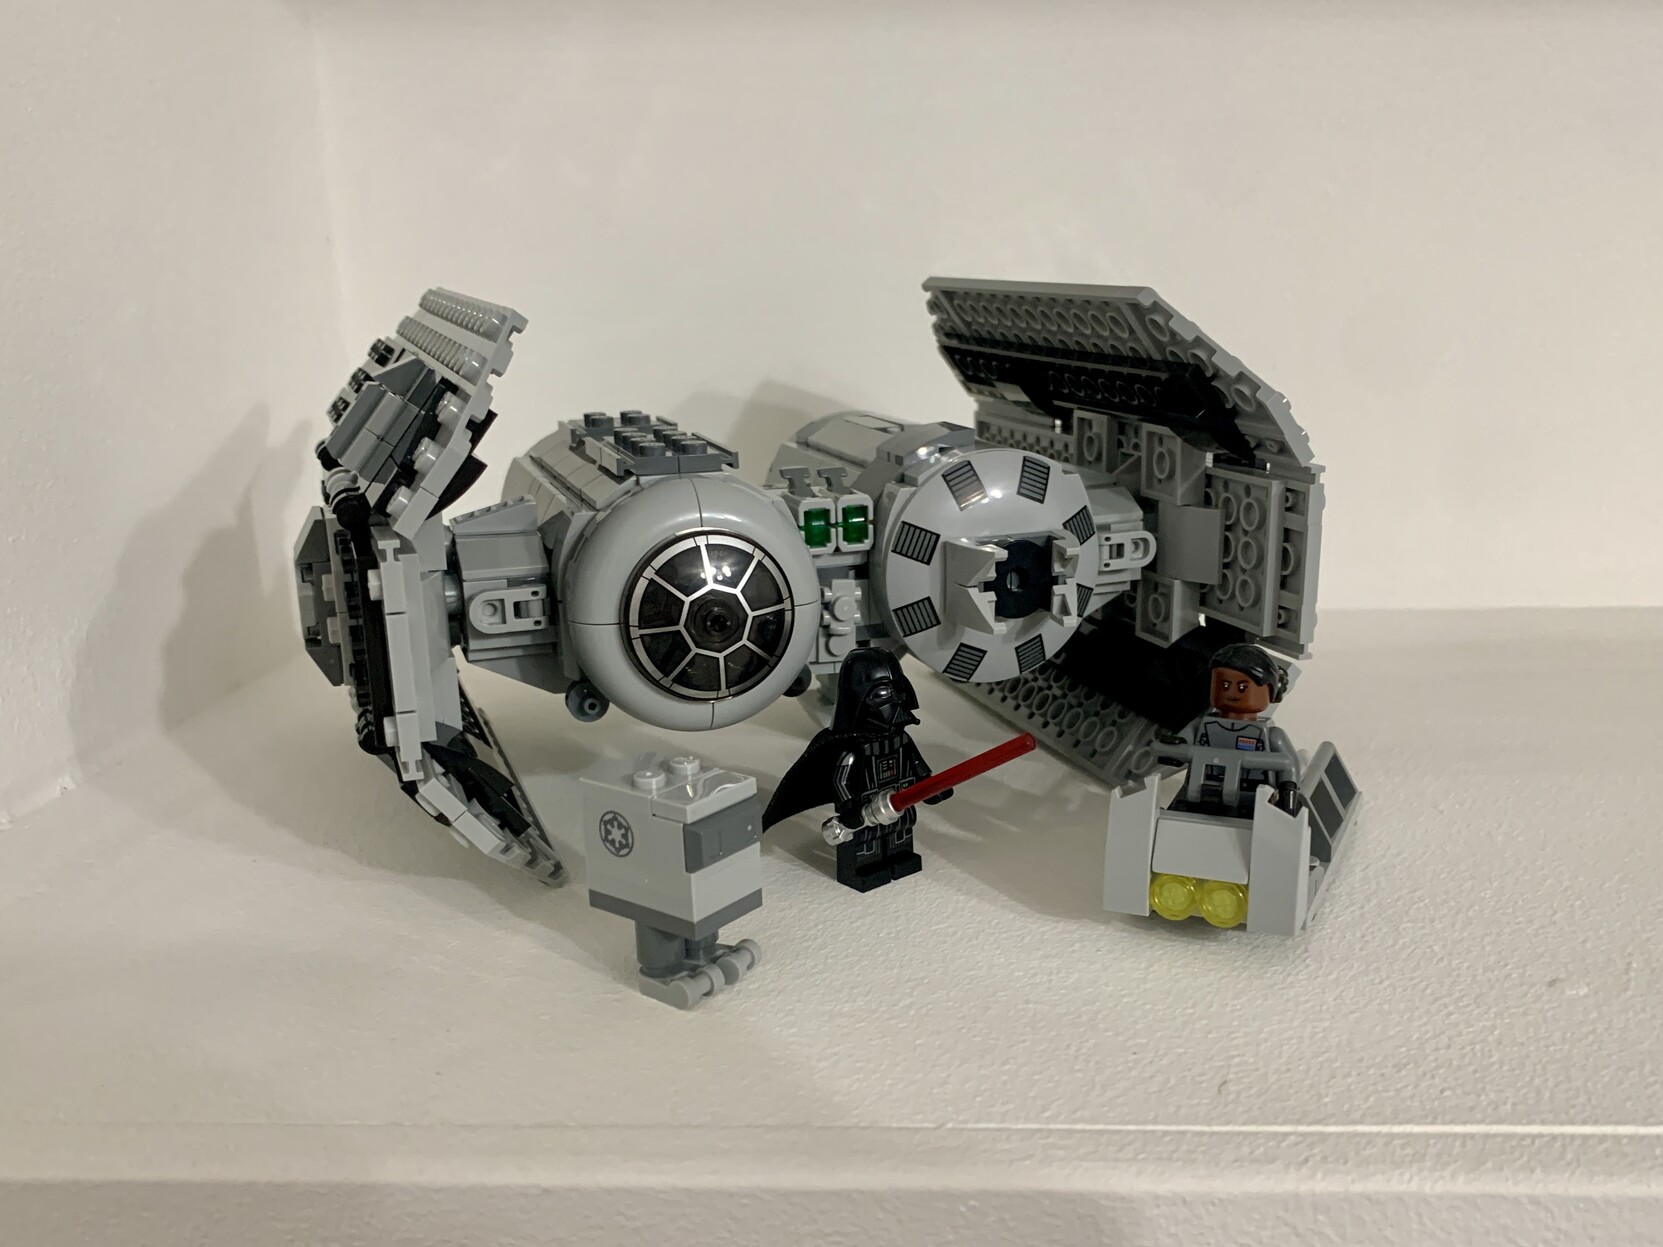 Lego Star Wars TIE bomber sat on a white shelf. In front of the bomber is an imperial gonk driod, Darth Vader with his lightsaber drawn, and vice Admiral Sloane piloting a trolley.